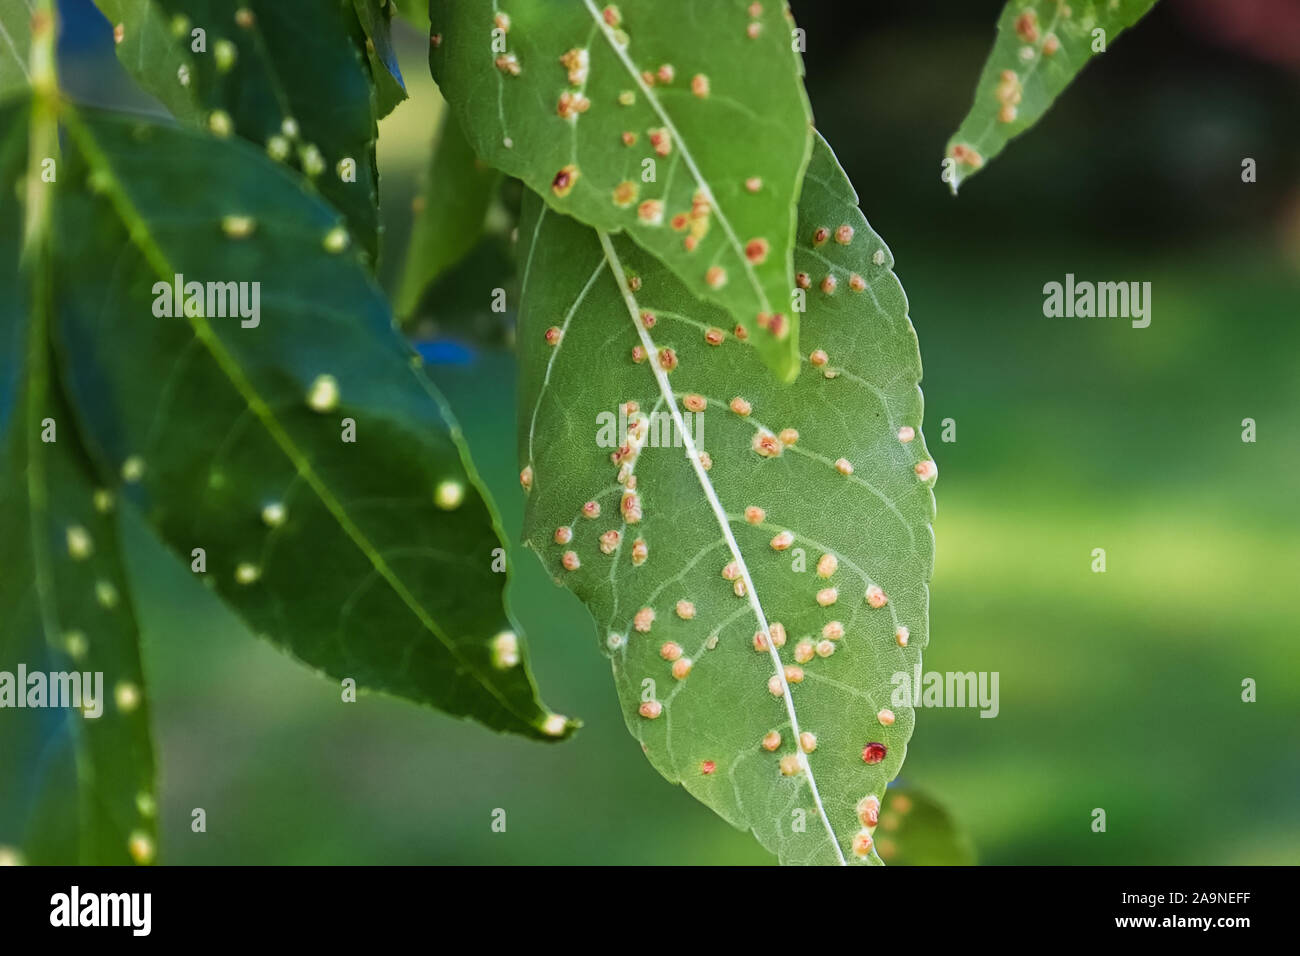 Gall blisters on the underside of ash tree leaves Stock Photo